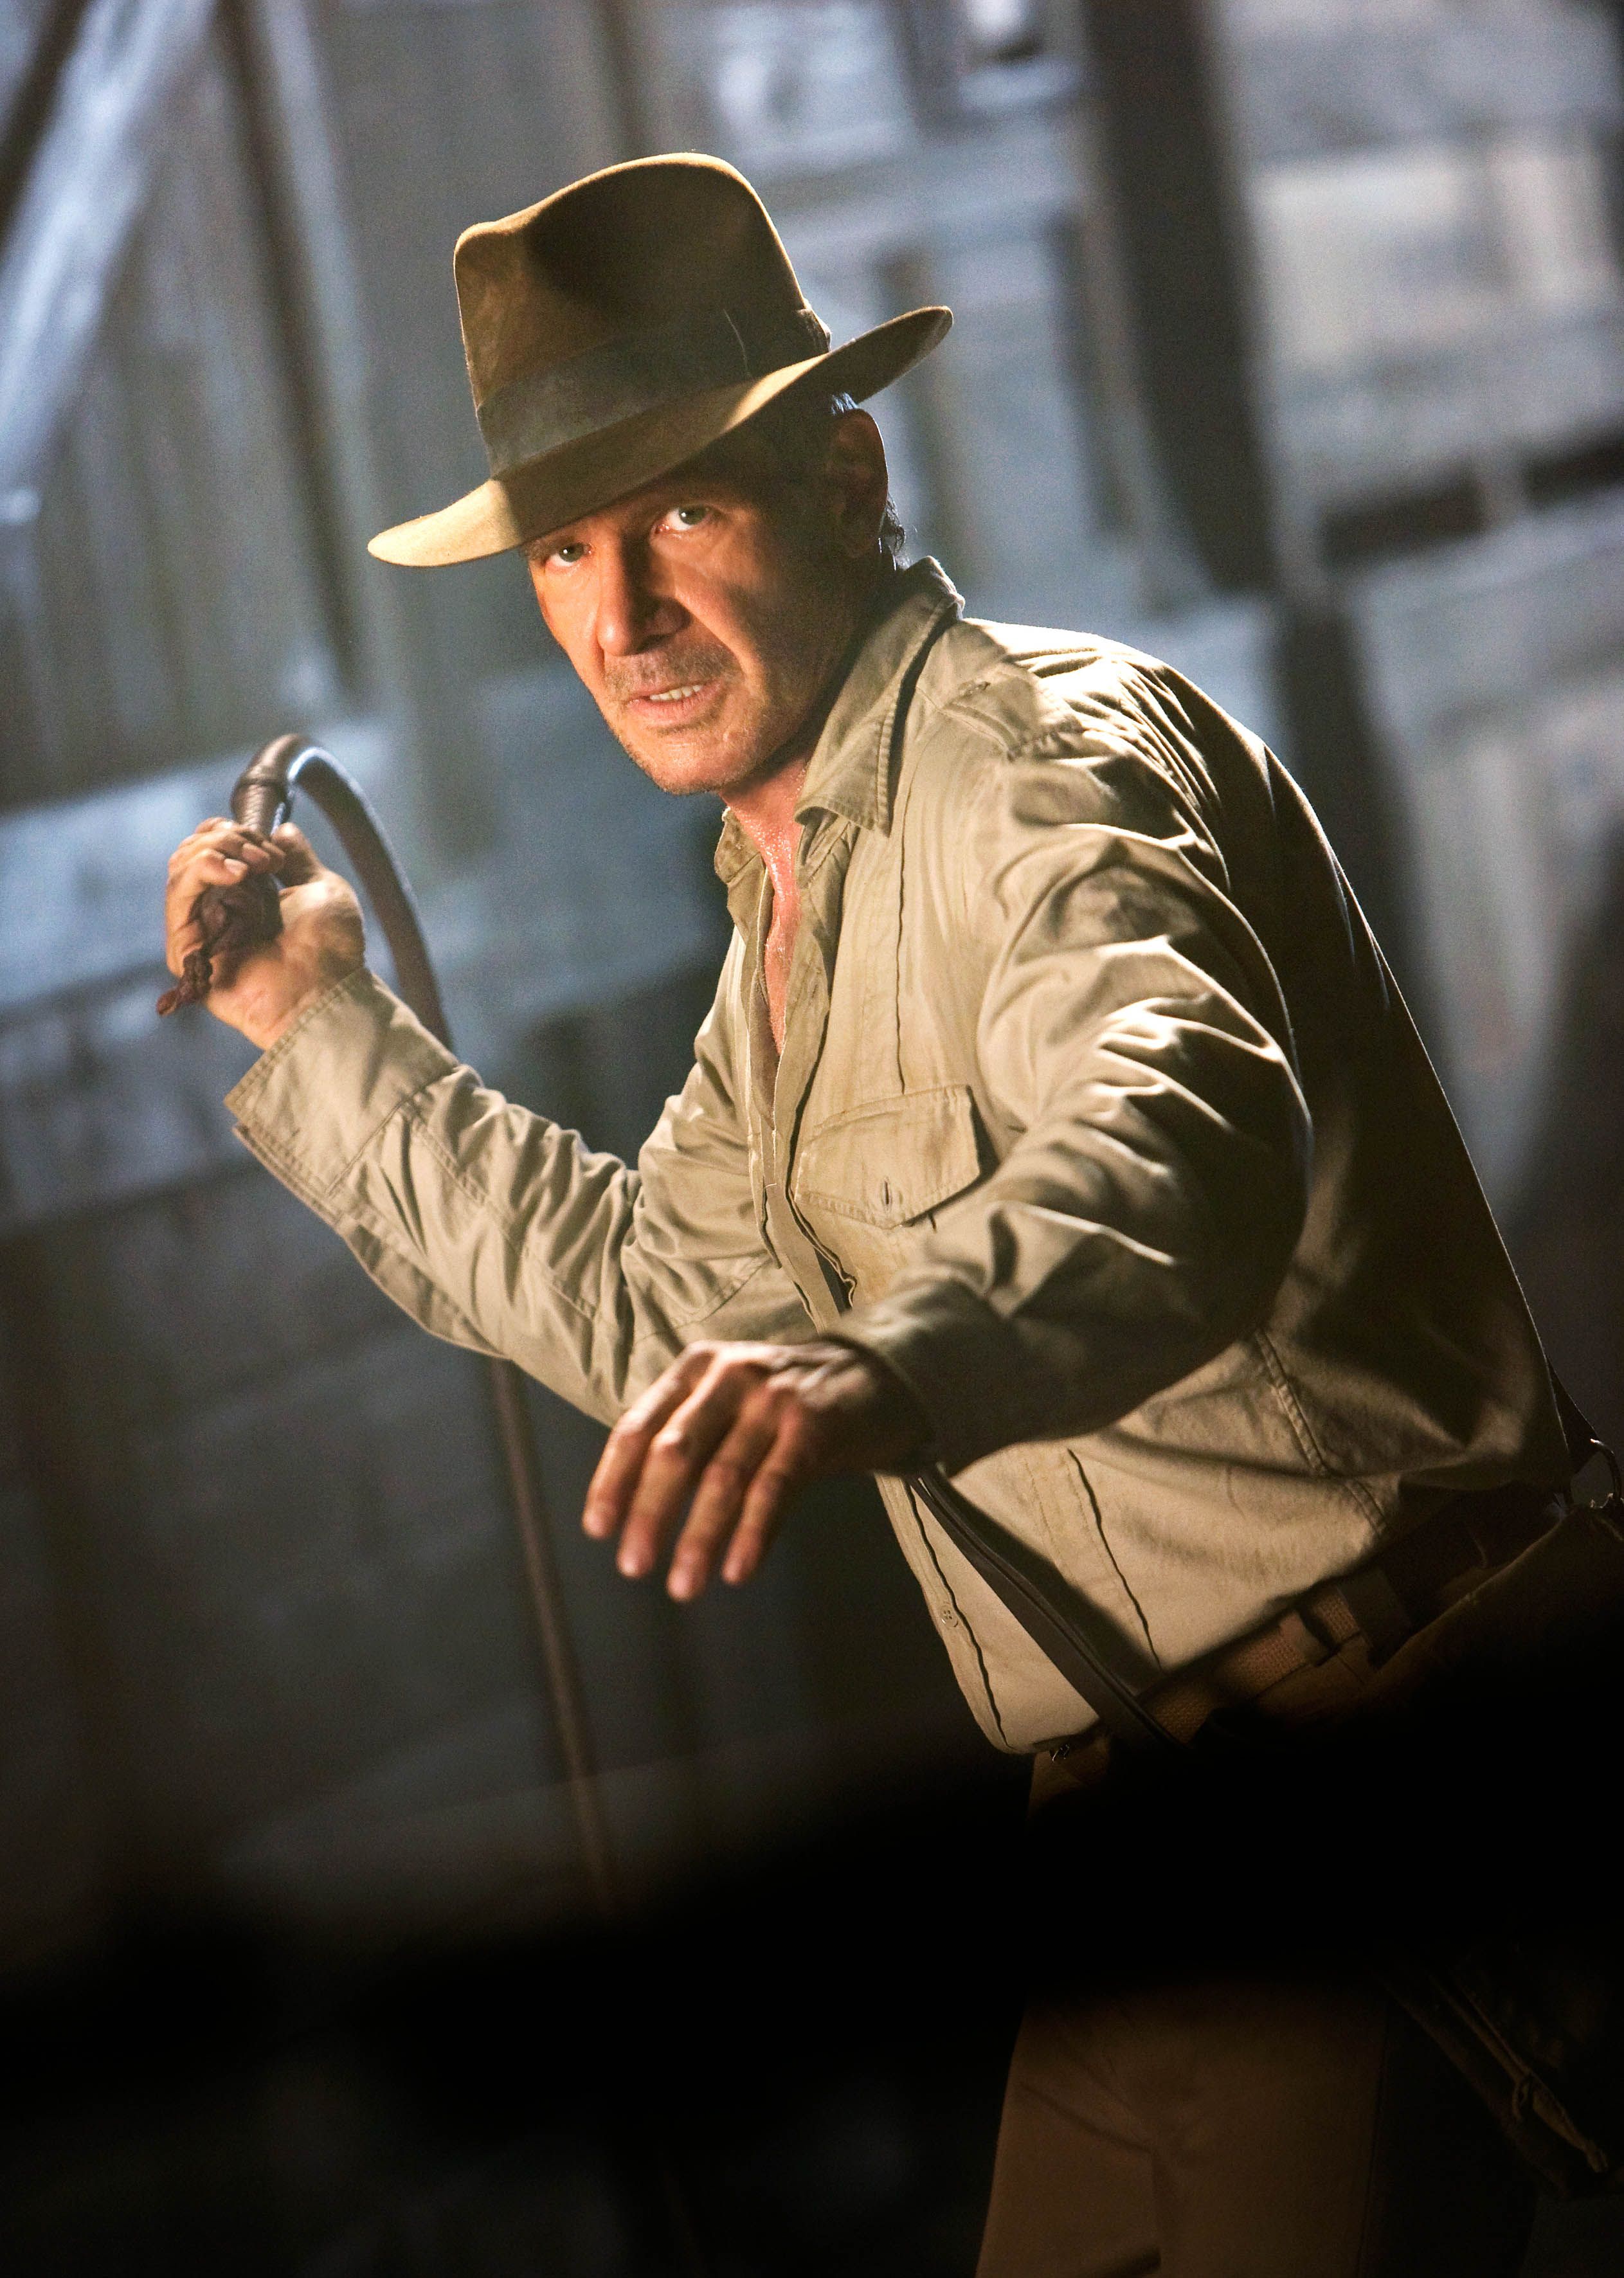 indiana jones and the kingdom of the crystal skull cast